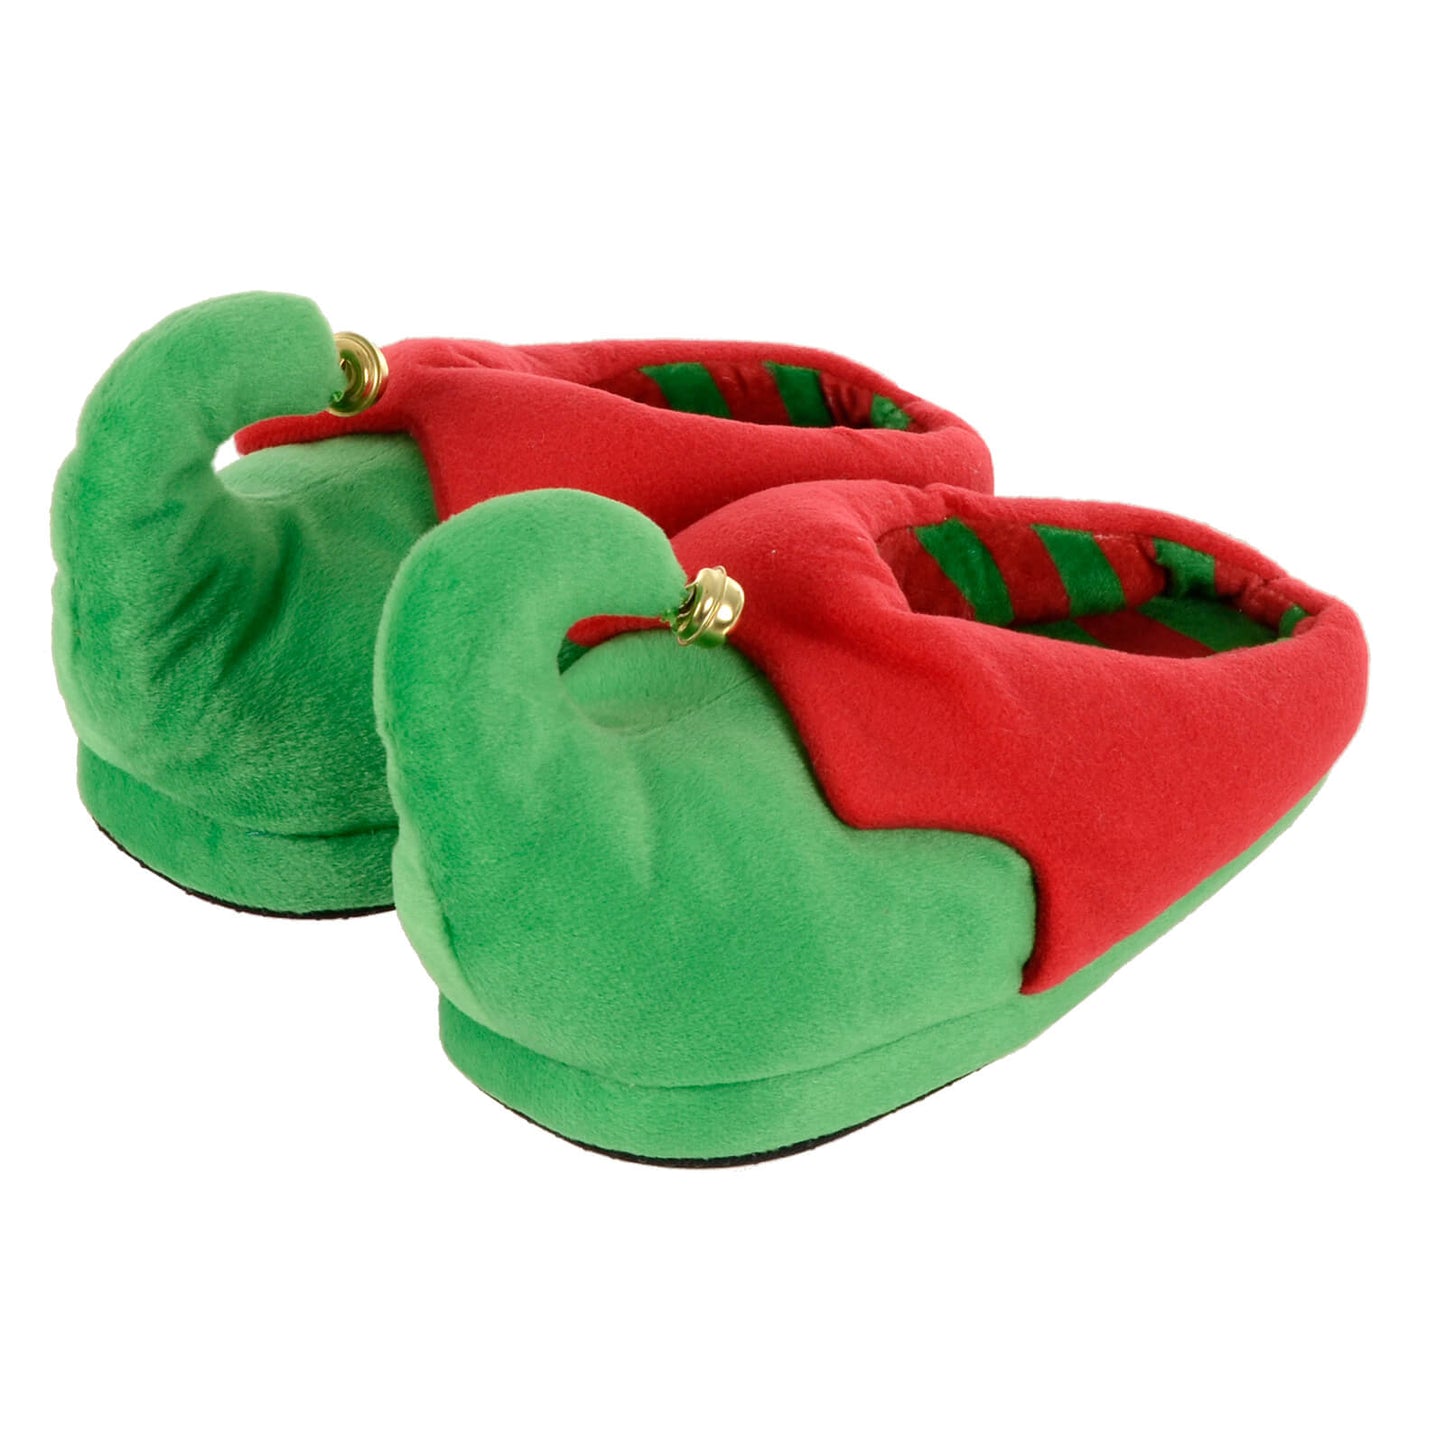 Green and red Christmas Elf slippers for women with gold jingle bells on pointed toes, padded upper and striped fleece lining